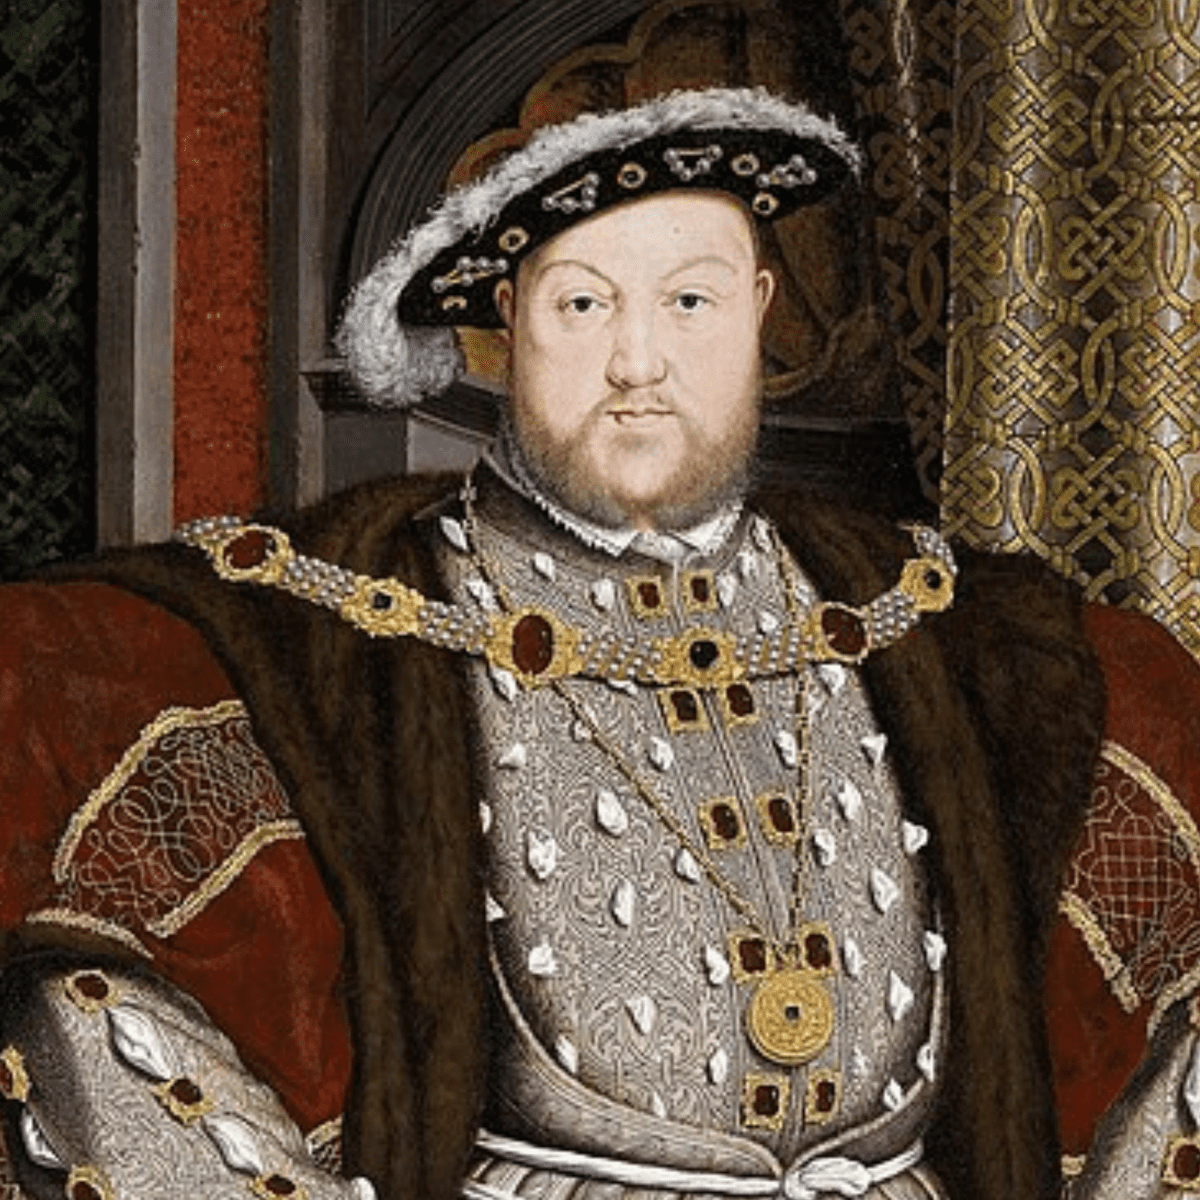 Henry VIII Lover or Tyrant? Did He Love His Six Wives?